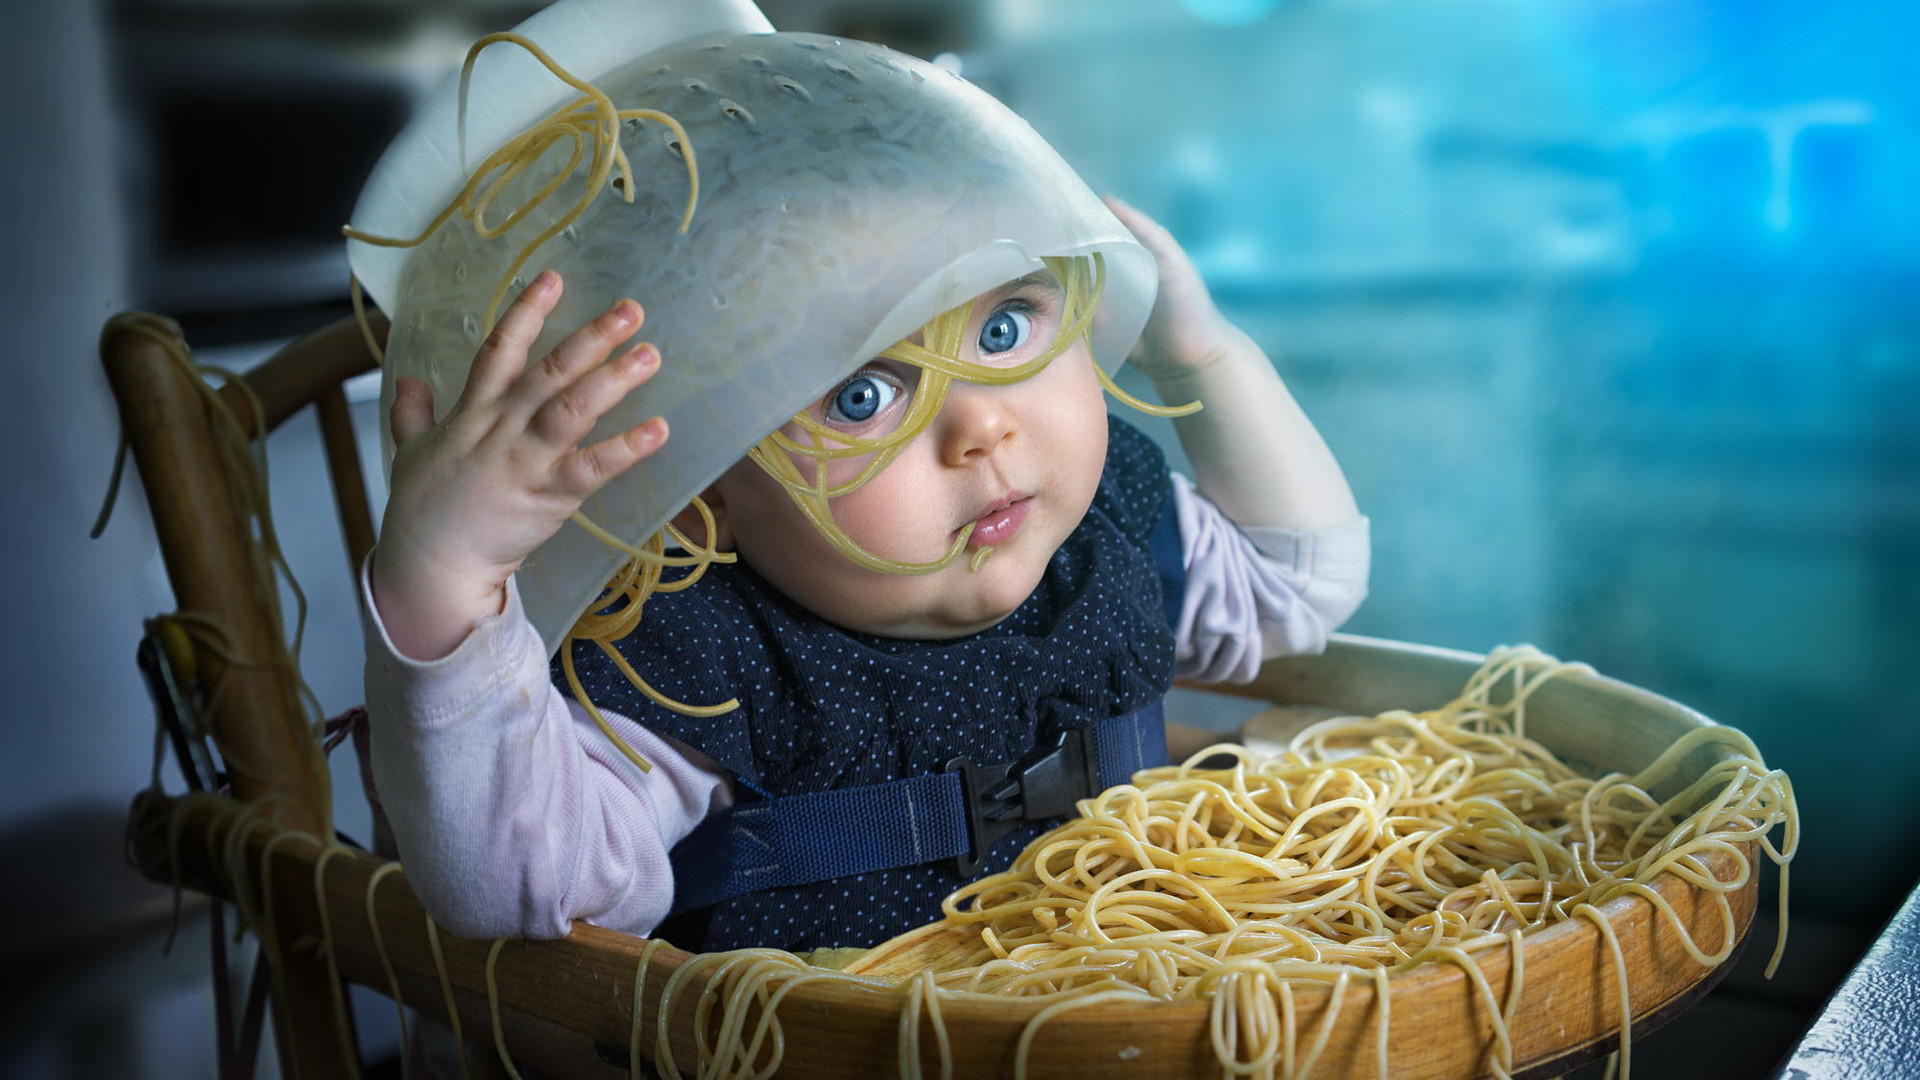 1920x1080 Funny, Baby Eating, Baby, Pasta, Spagetti, Cute Baby, Cute Baby